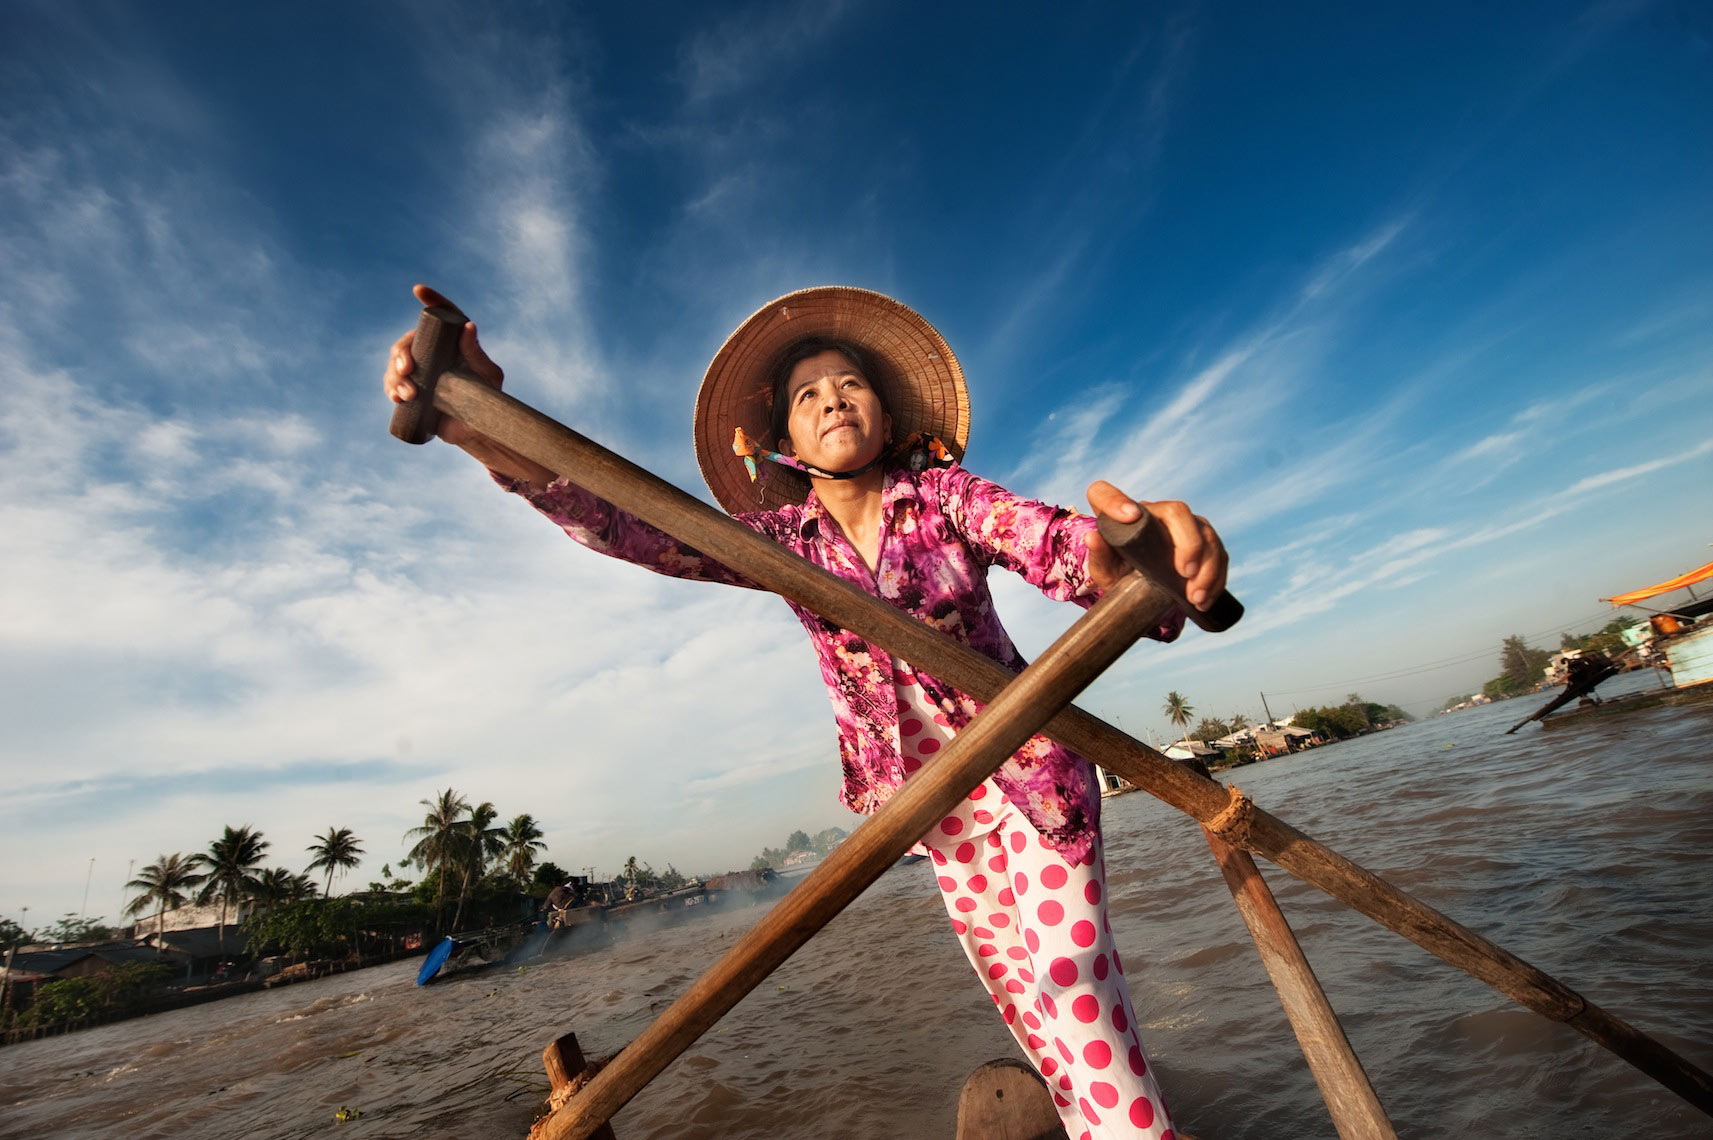 Interesting things to do in the Mekong Delta